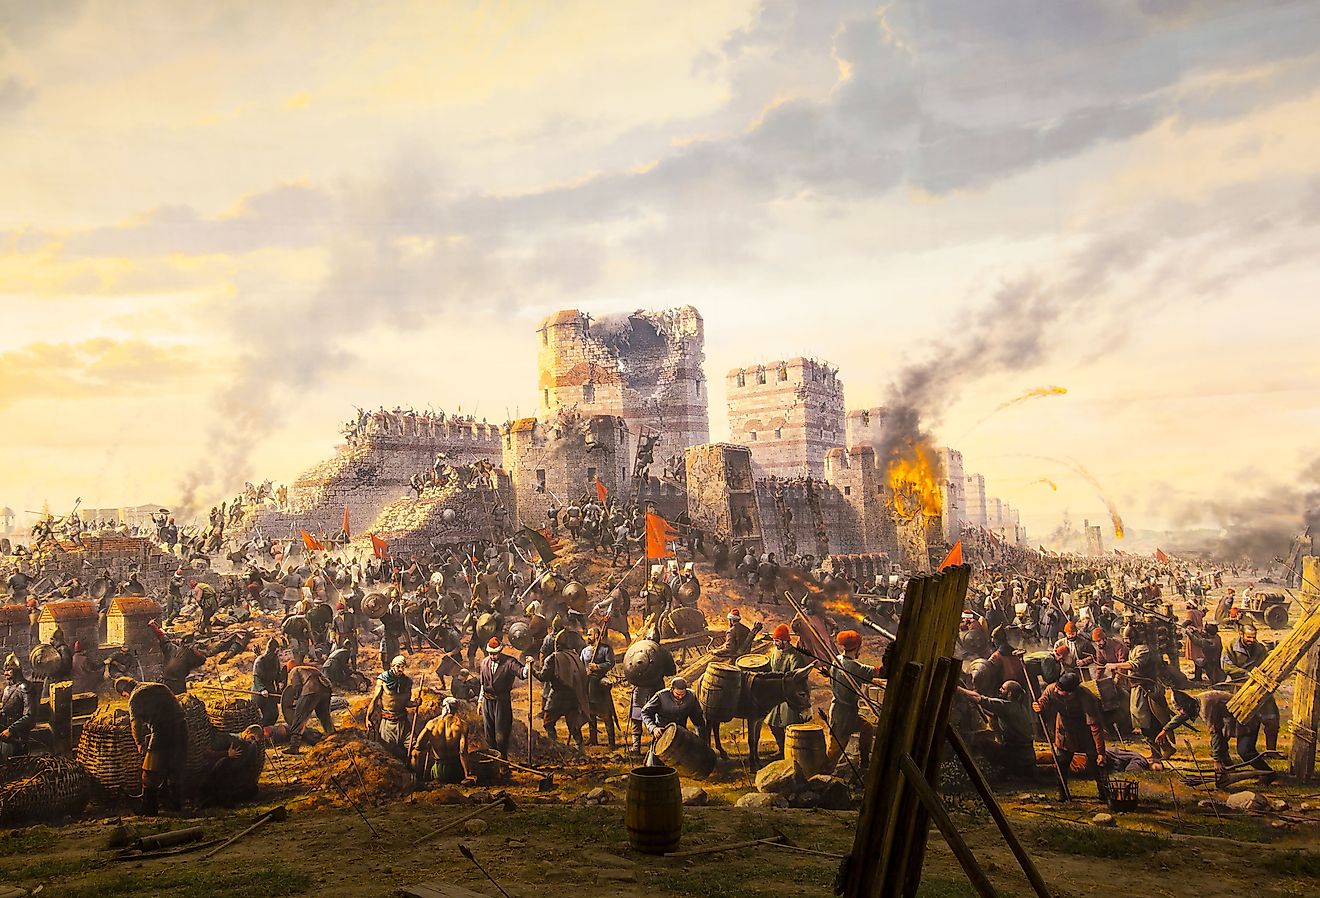 Illustration of the Fall of Constantinople in 1453. Image credit Lestertair via Shutterstock.